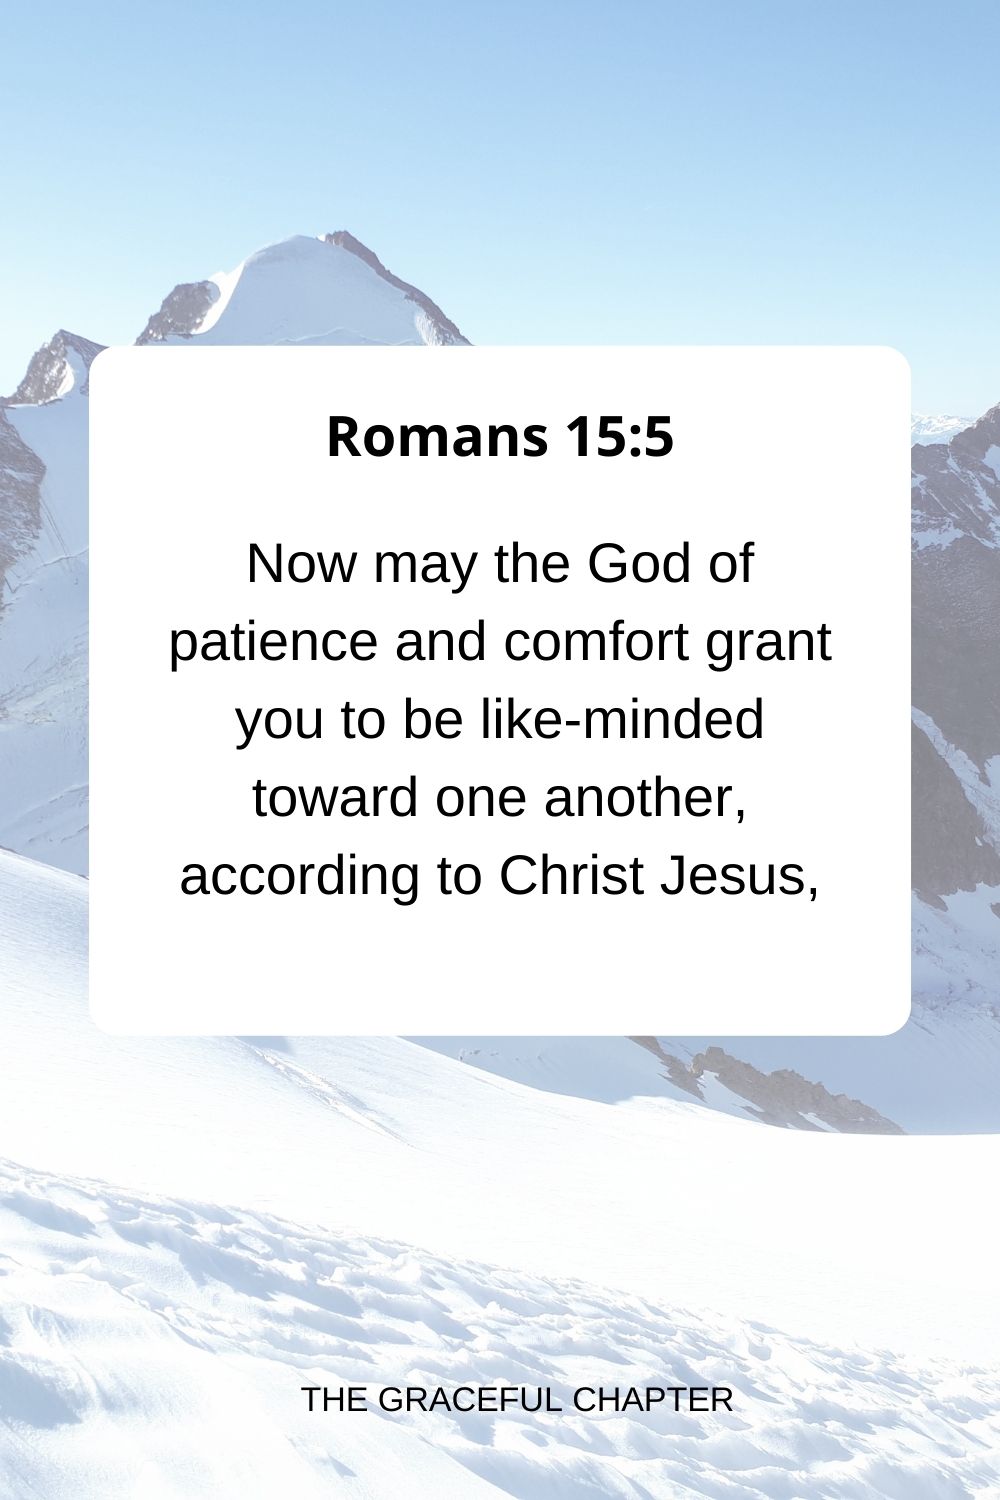 Now may the God of patience and comfort grant you to be like-minded toward one another, according to Christ Jesus, Romans 15:5